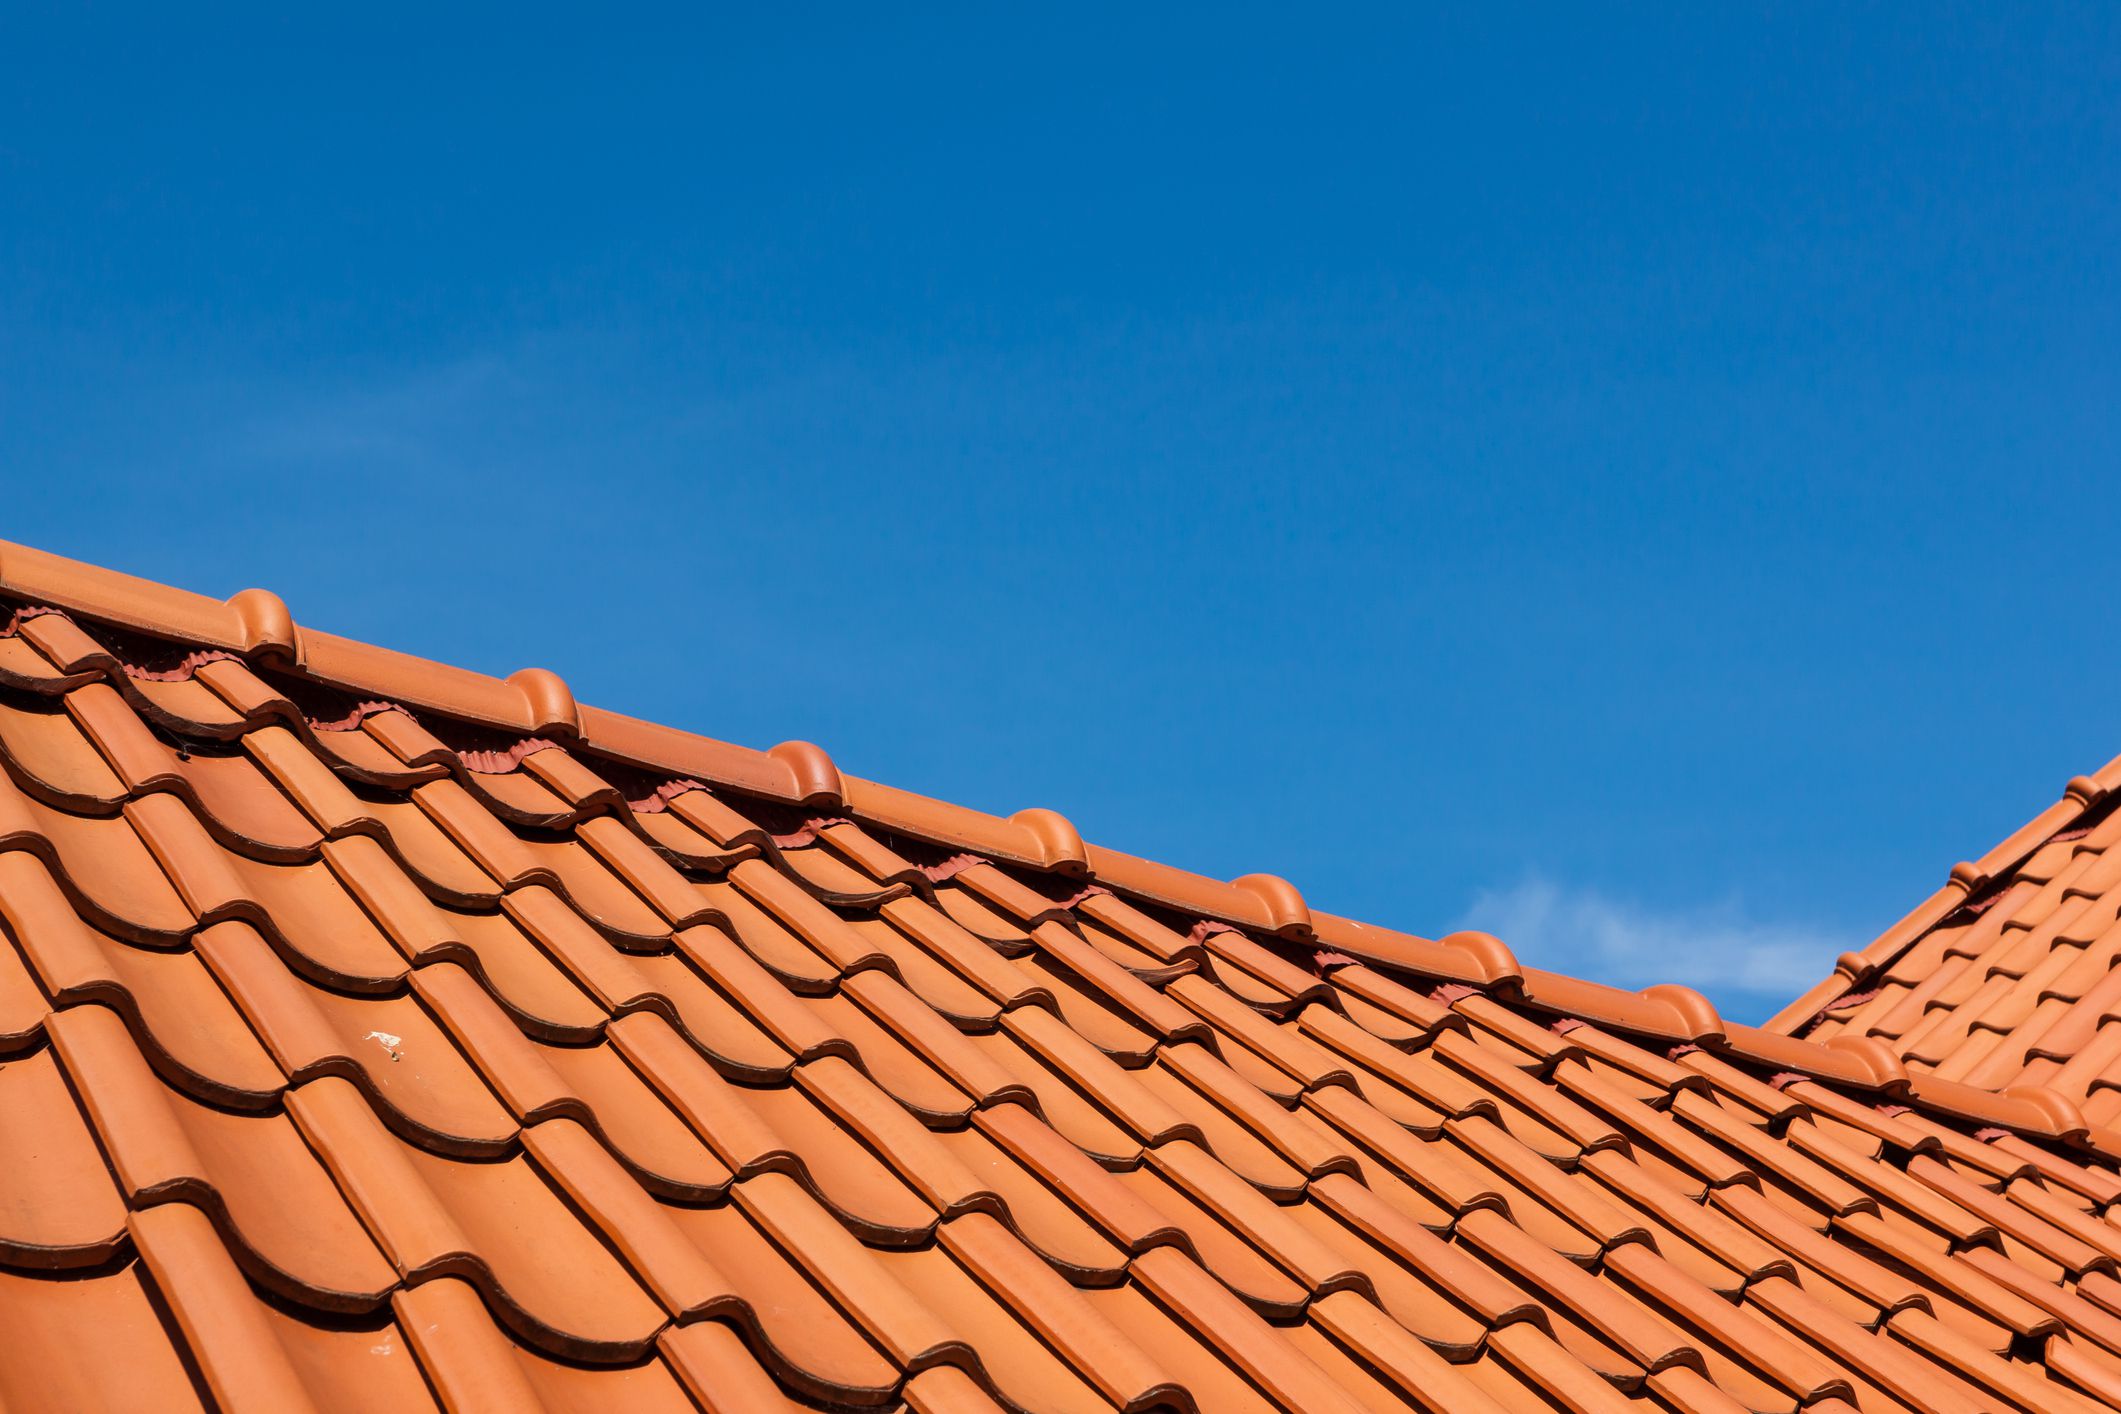 Check the roof tile designs in india